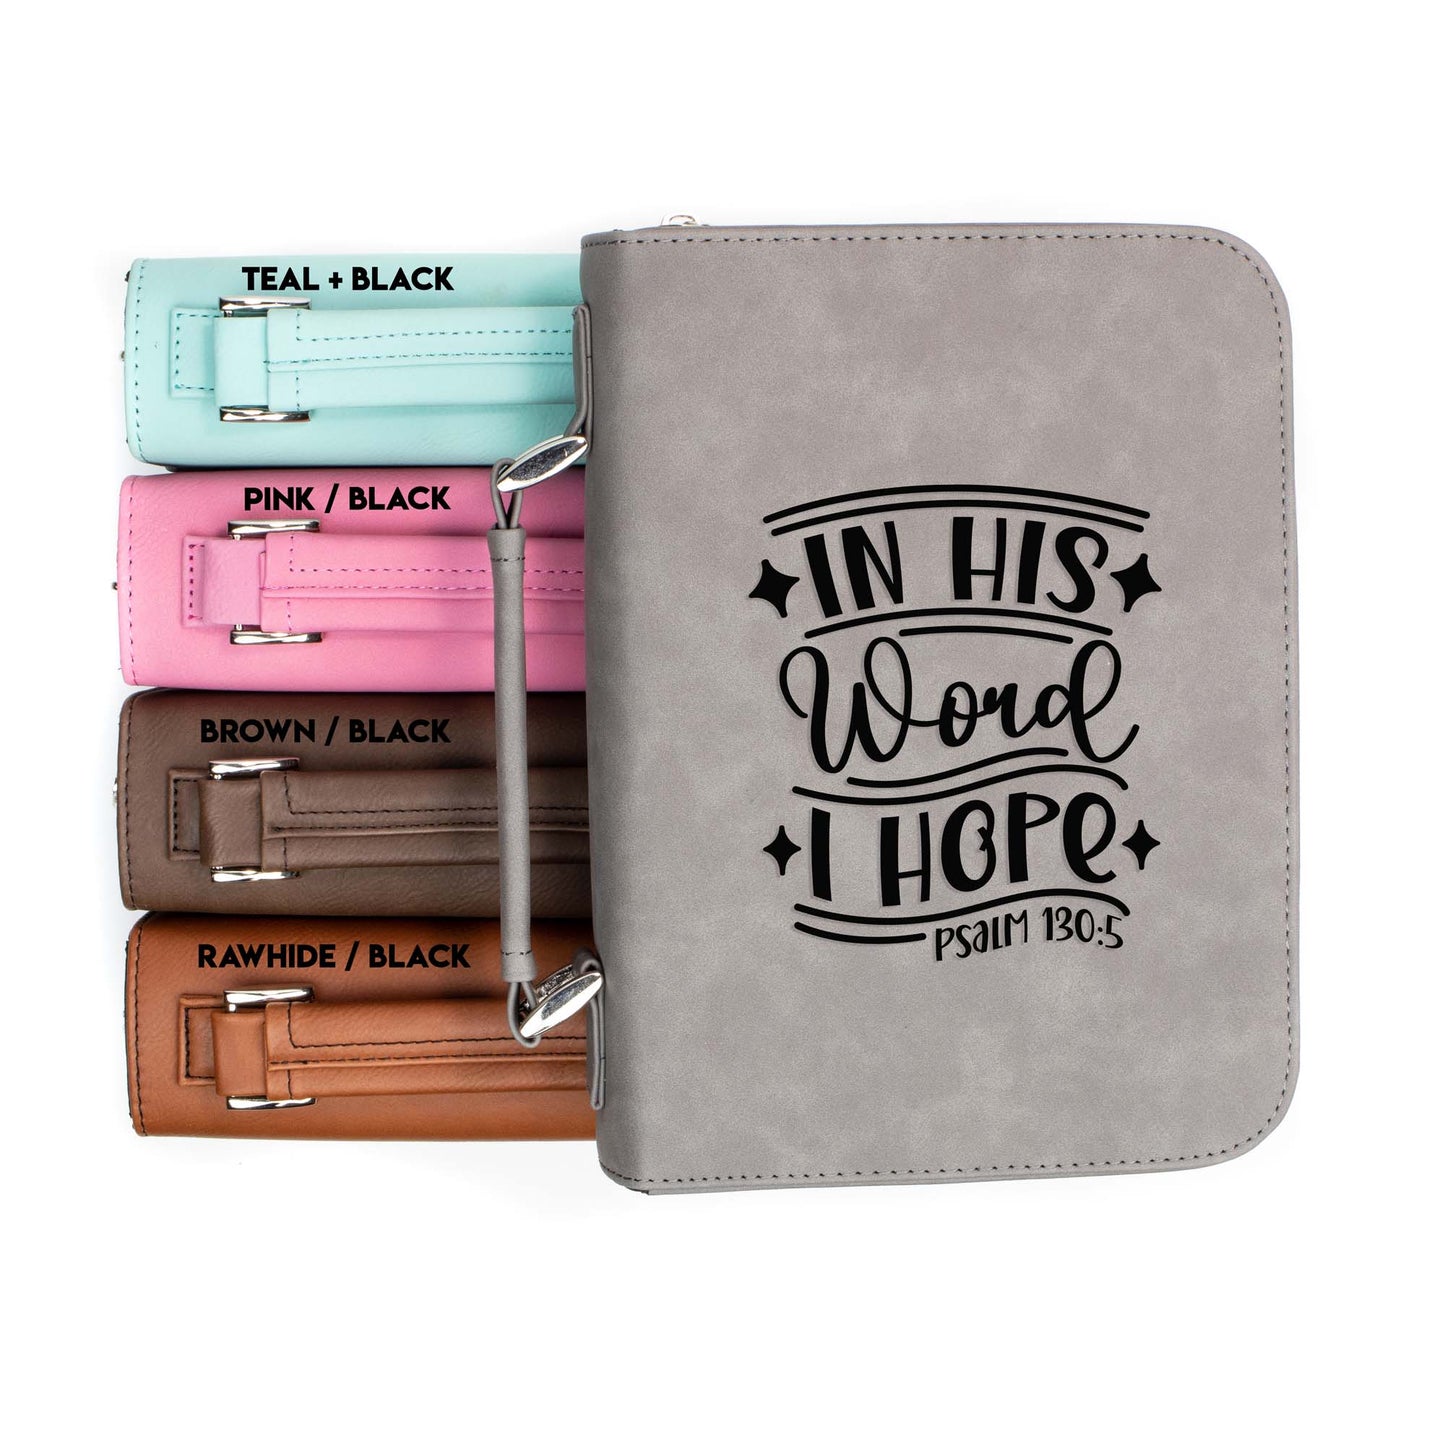 In His Word I Hope Psalm 130-5 Bible Cover | Faux Leather With Handle + Pockets